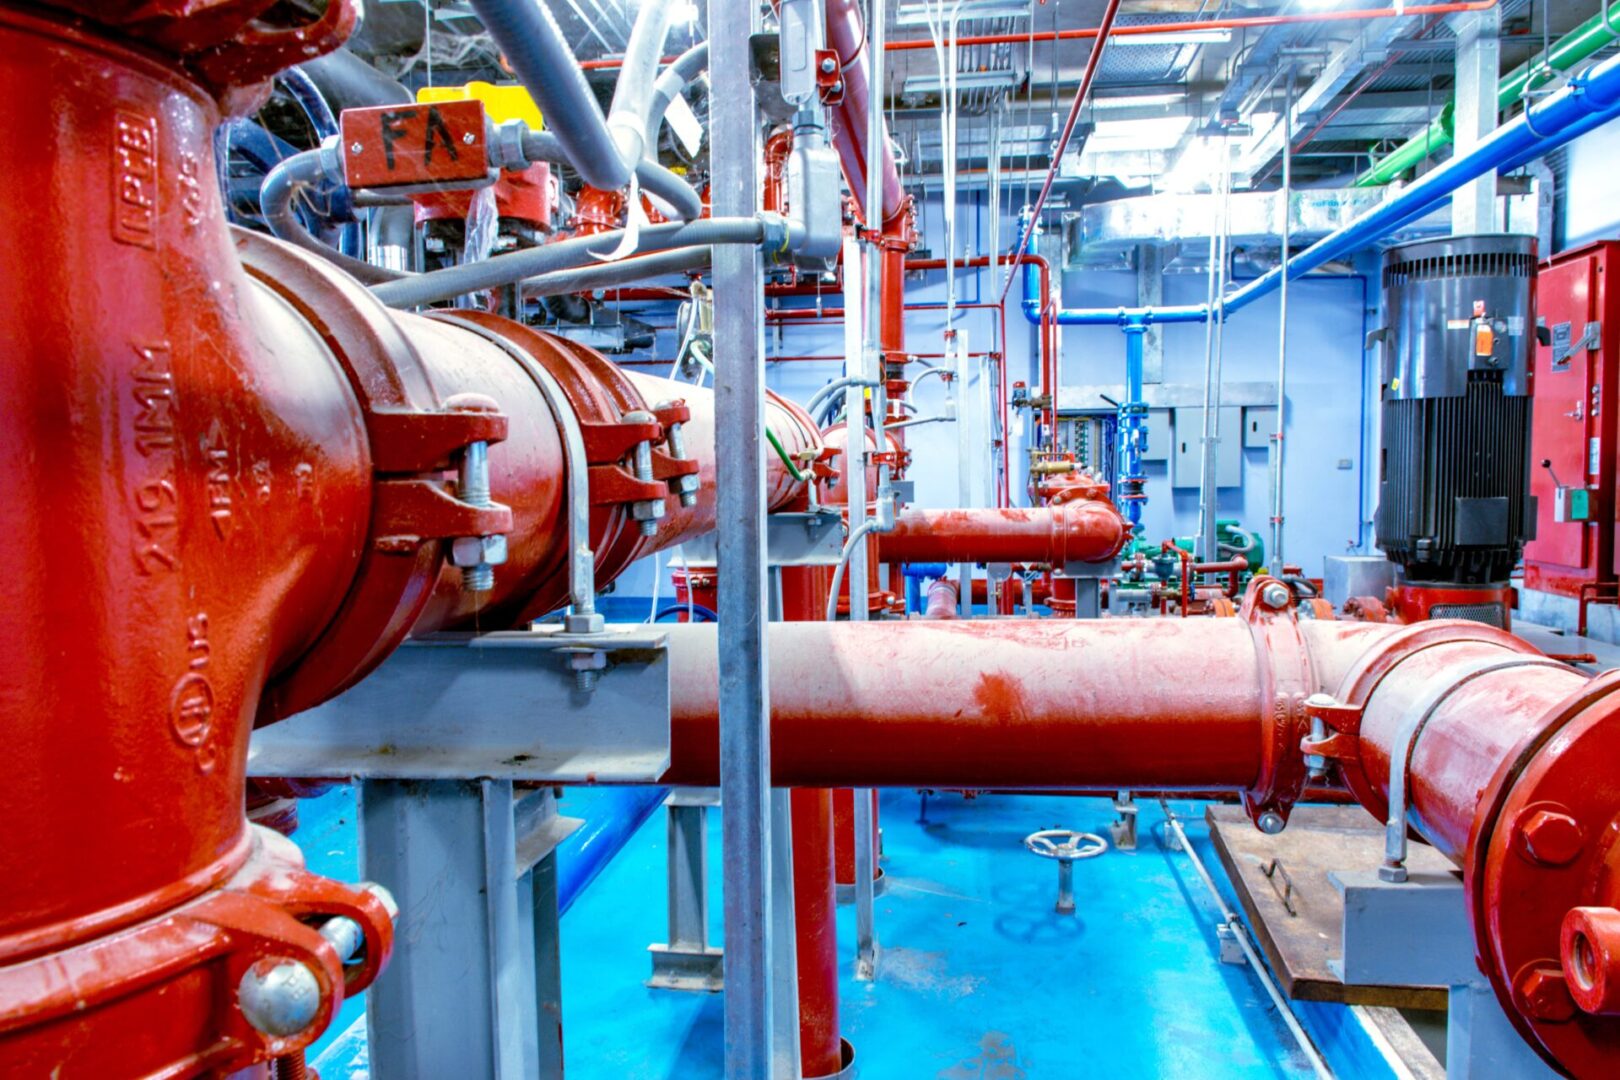 A large red pipe system in a blue room.